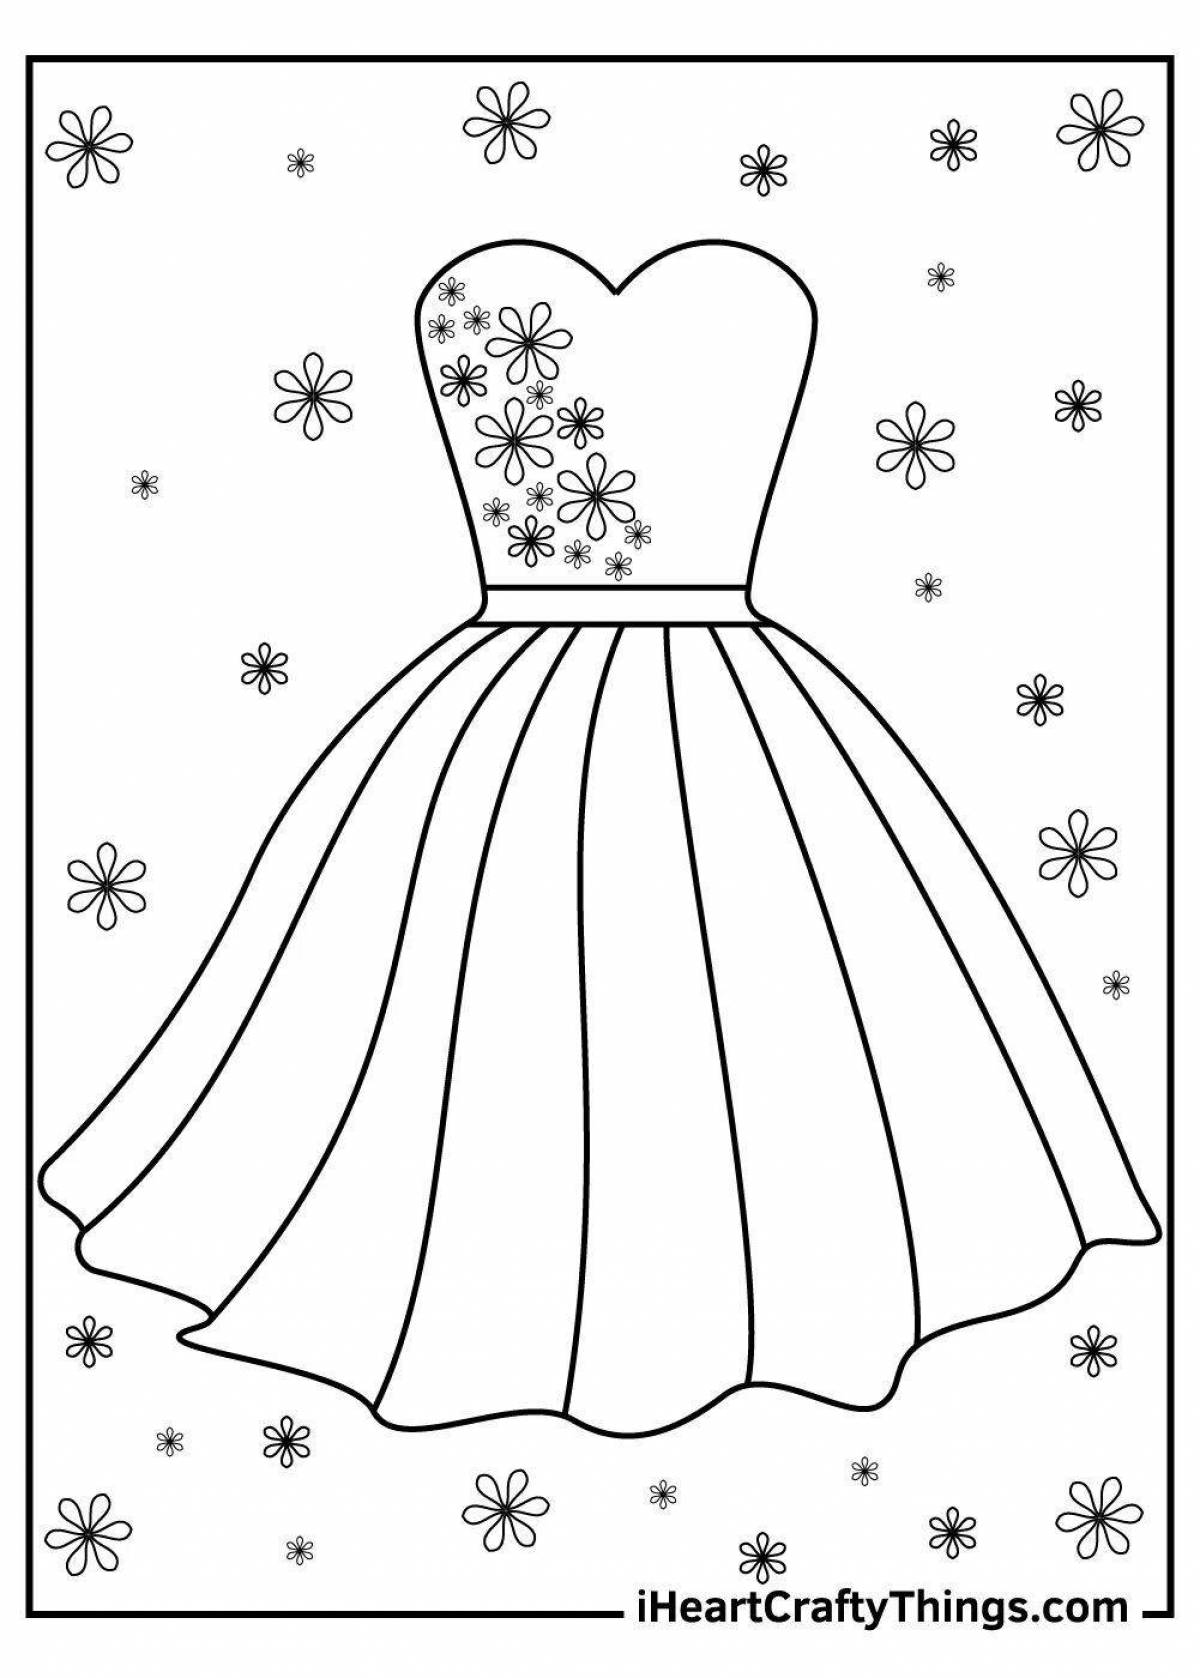 Coloring book shining dress for dolls